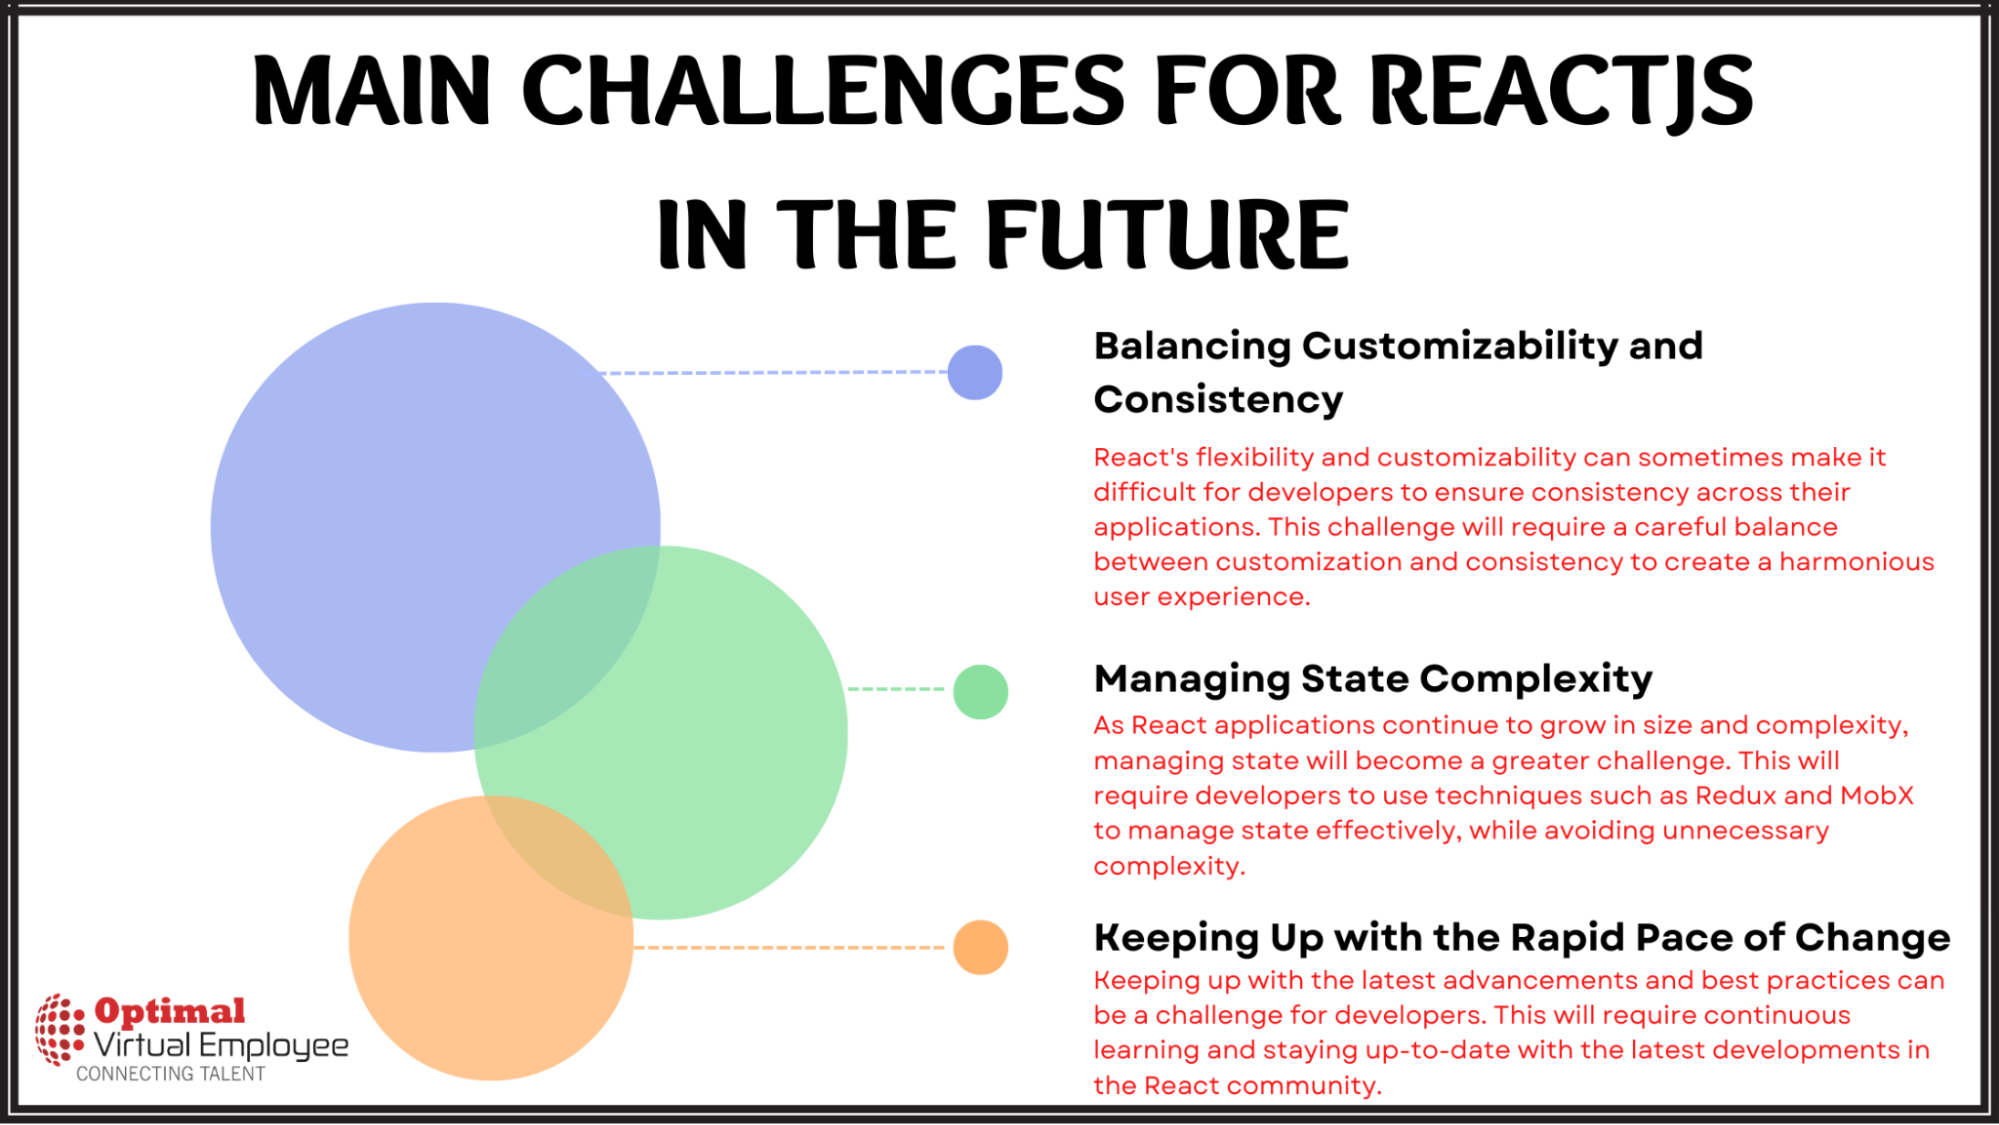 Challenges and Opportunities for ReactJS in the Future